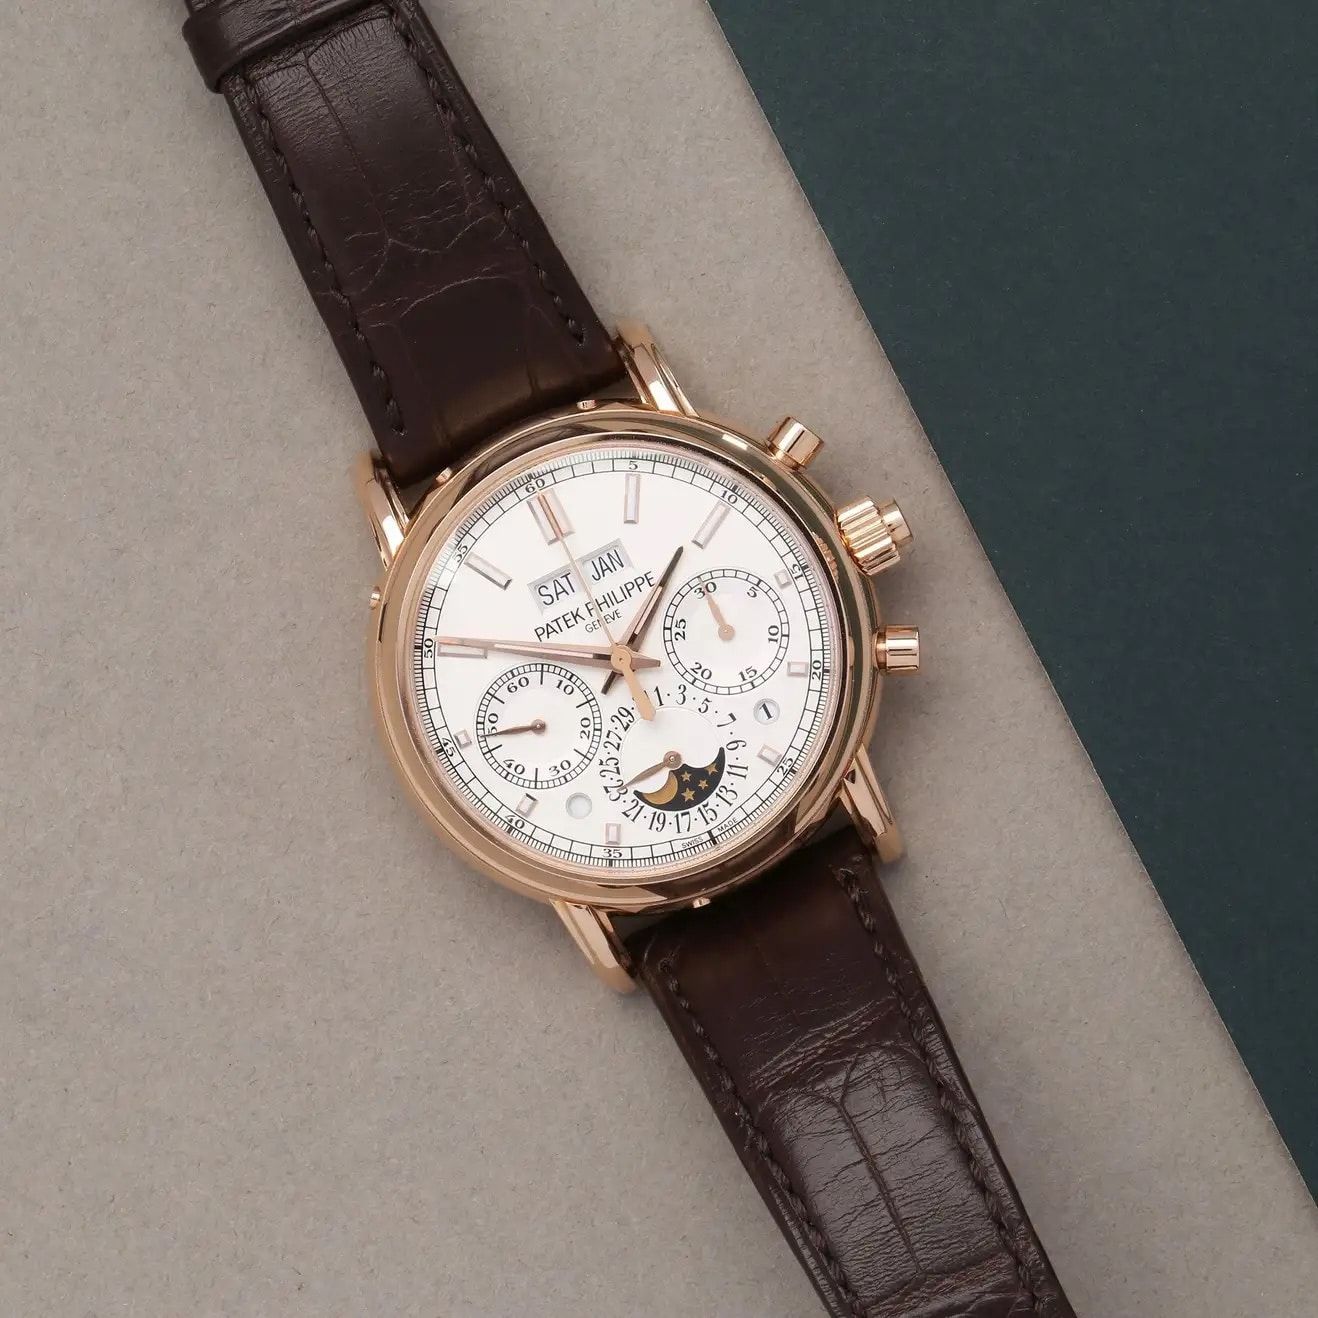 How to Spot a Fake Patek Philippe Watch